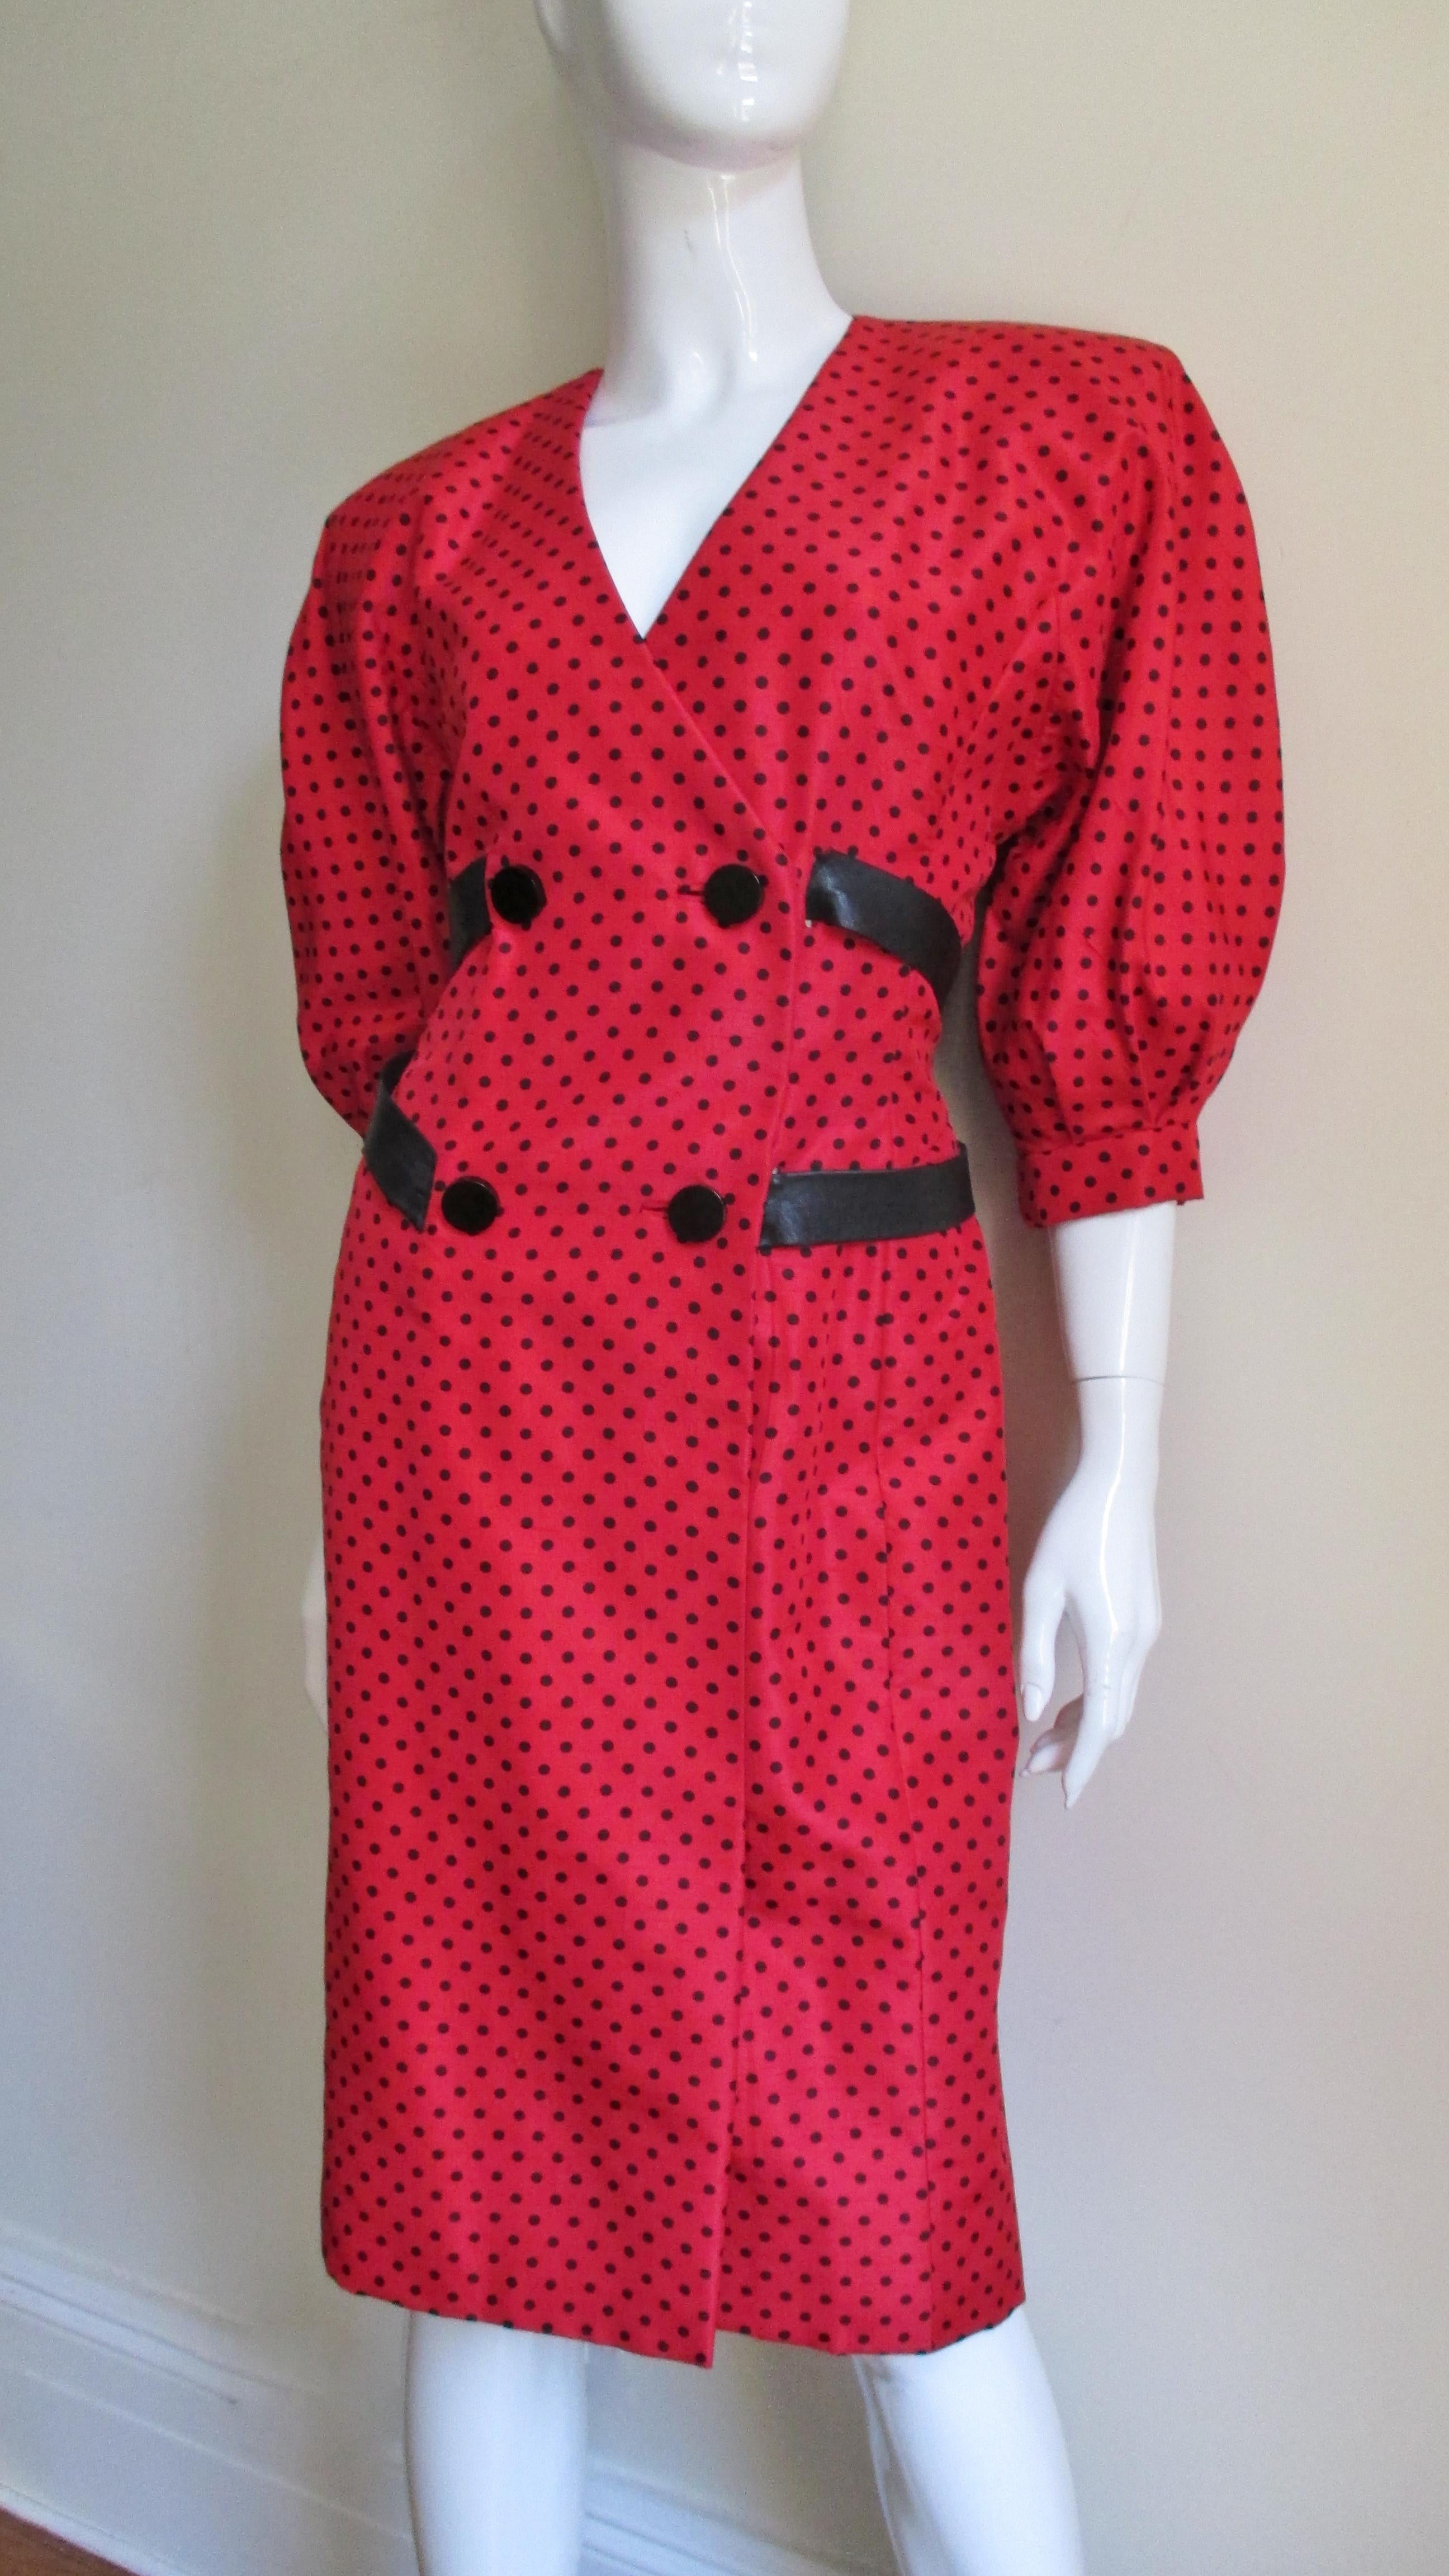 A fabulous red silk dress with black dots by French designer Jacqueline de Ribes.  It has a double breasted wrap style closing with round black buttons and bound buttonholes and fabulous black leather straps wrapping around the dress above and below